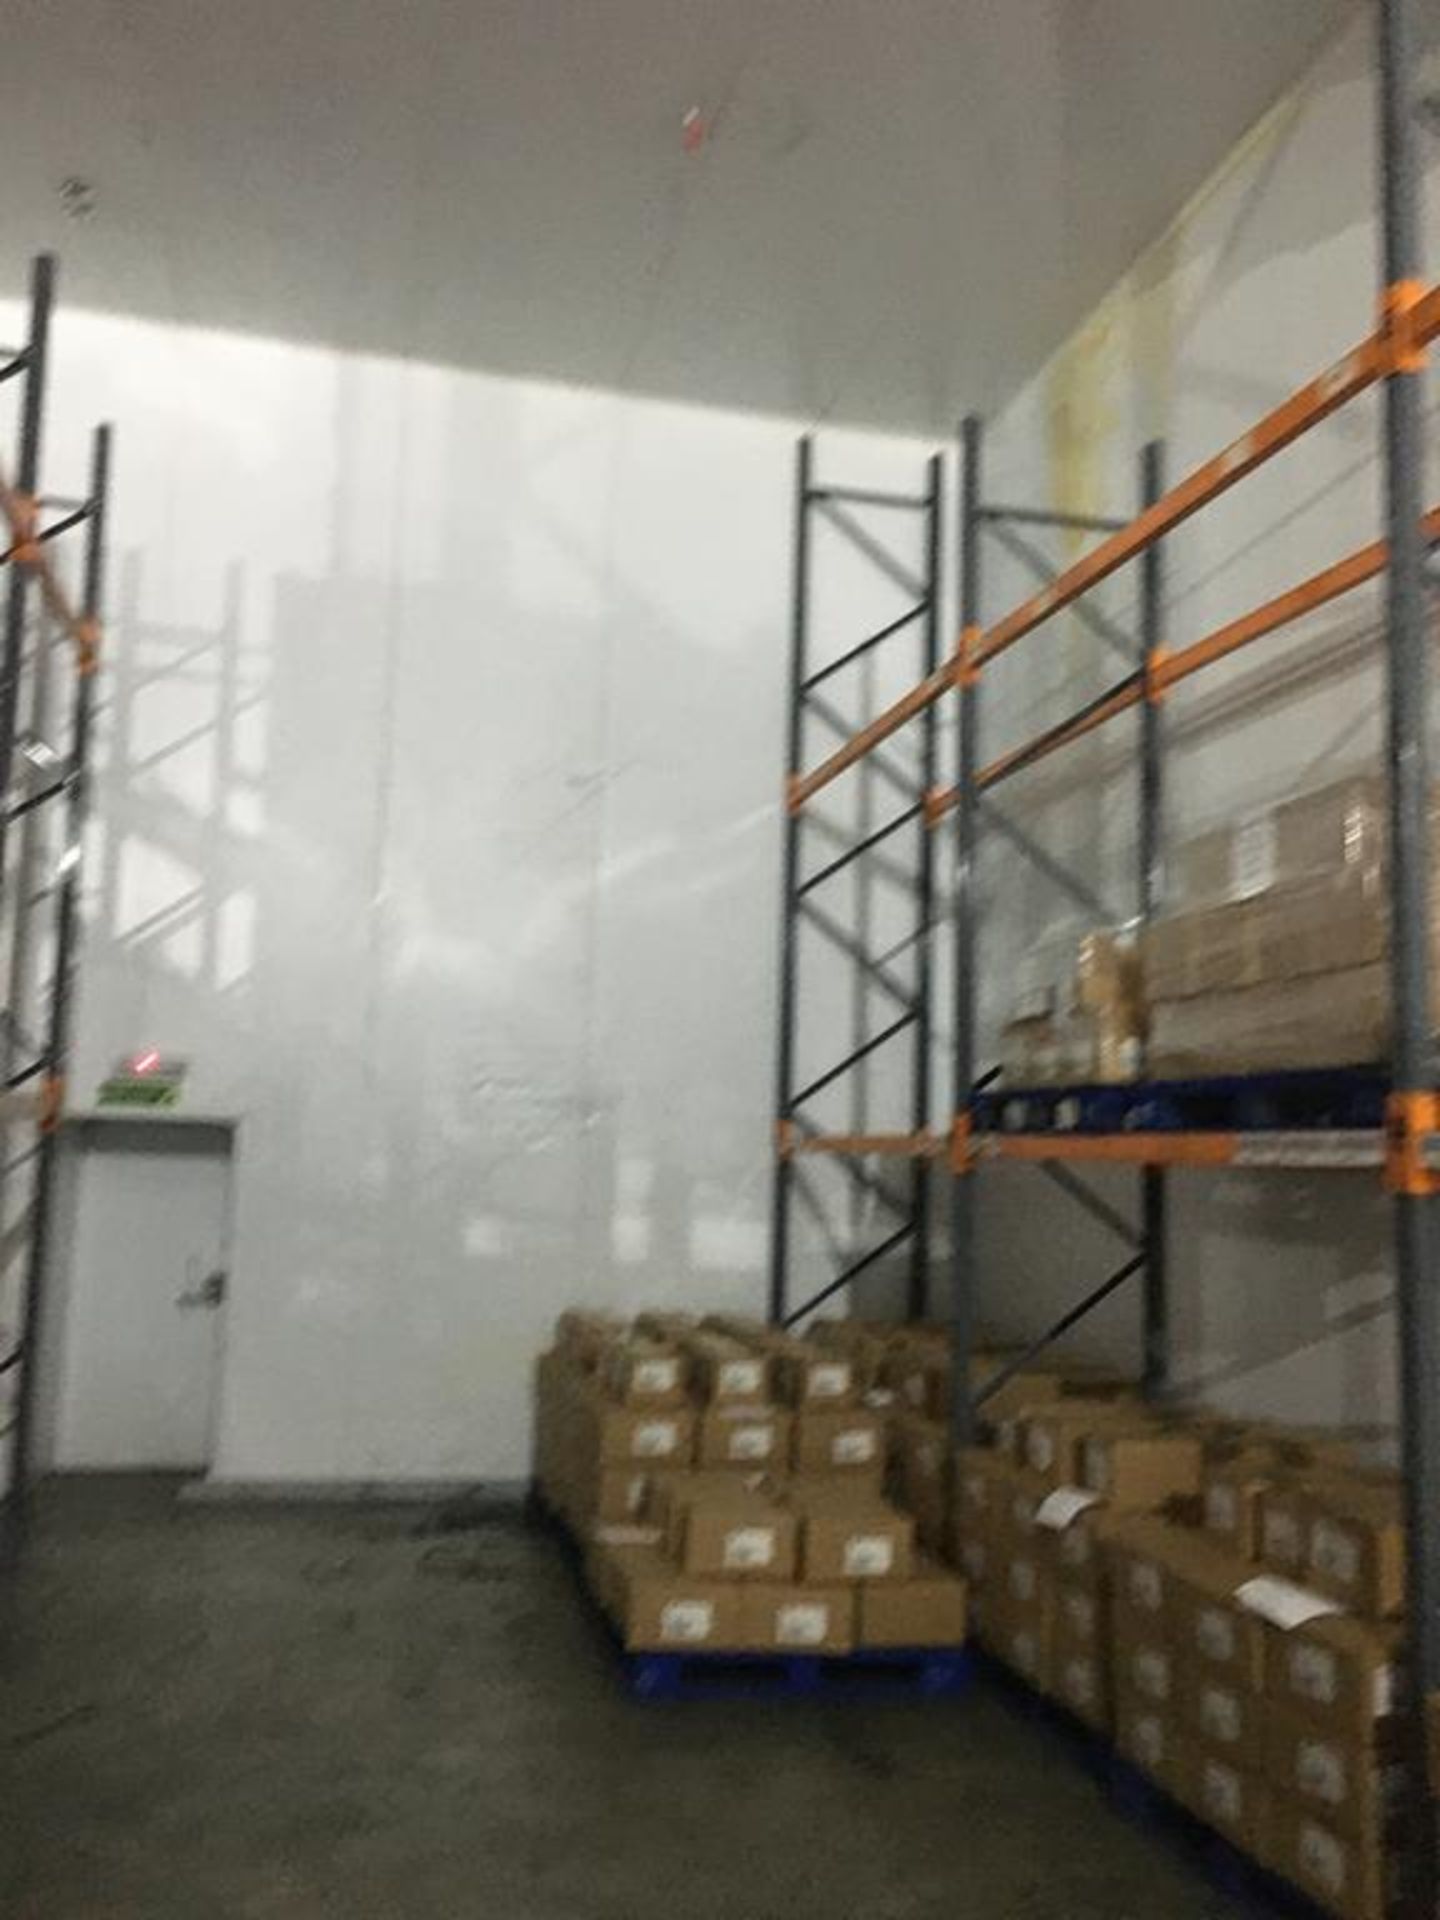 Dexion and Storax mixed bundle of racking in cold store - Image 6 of 6